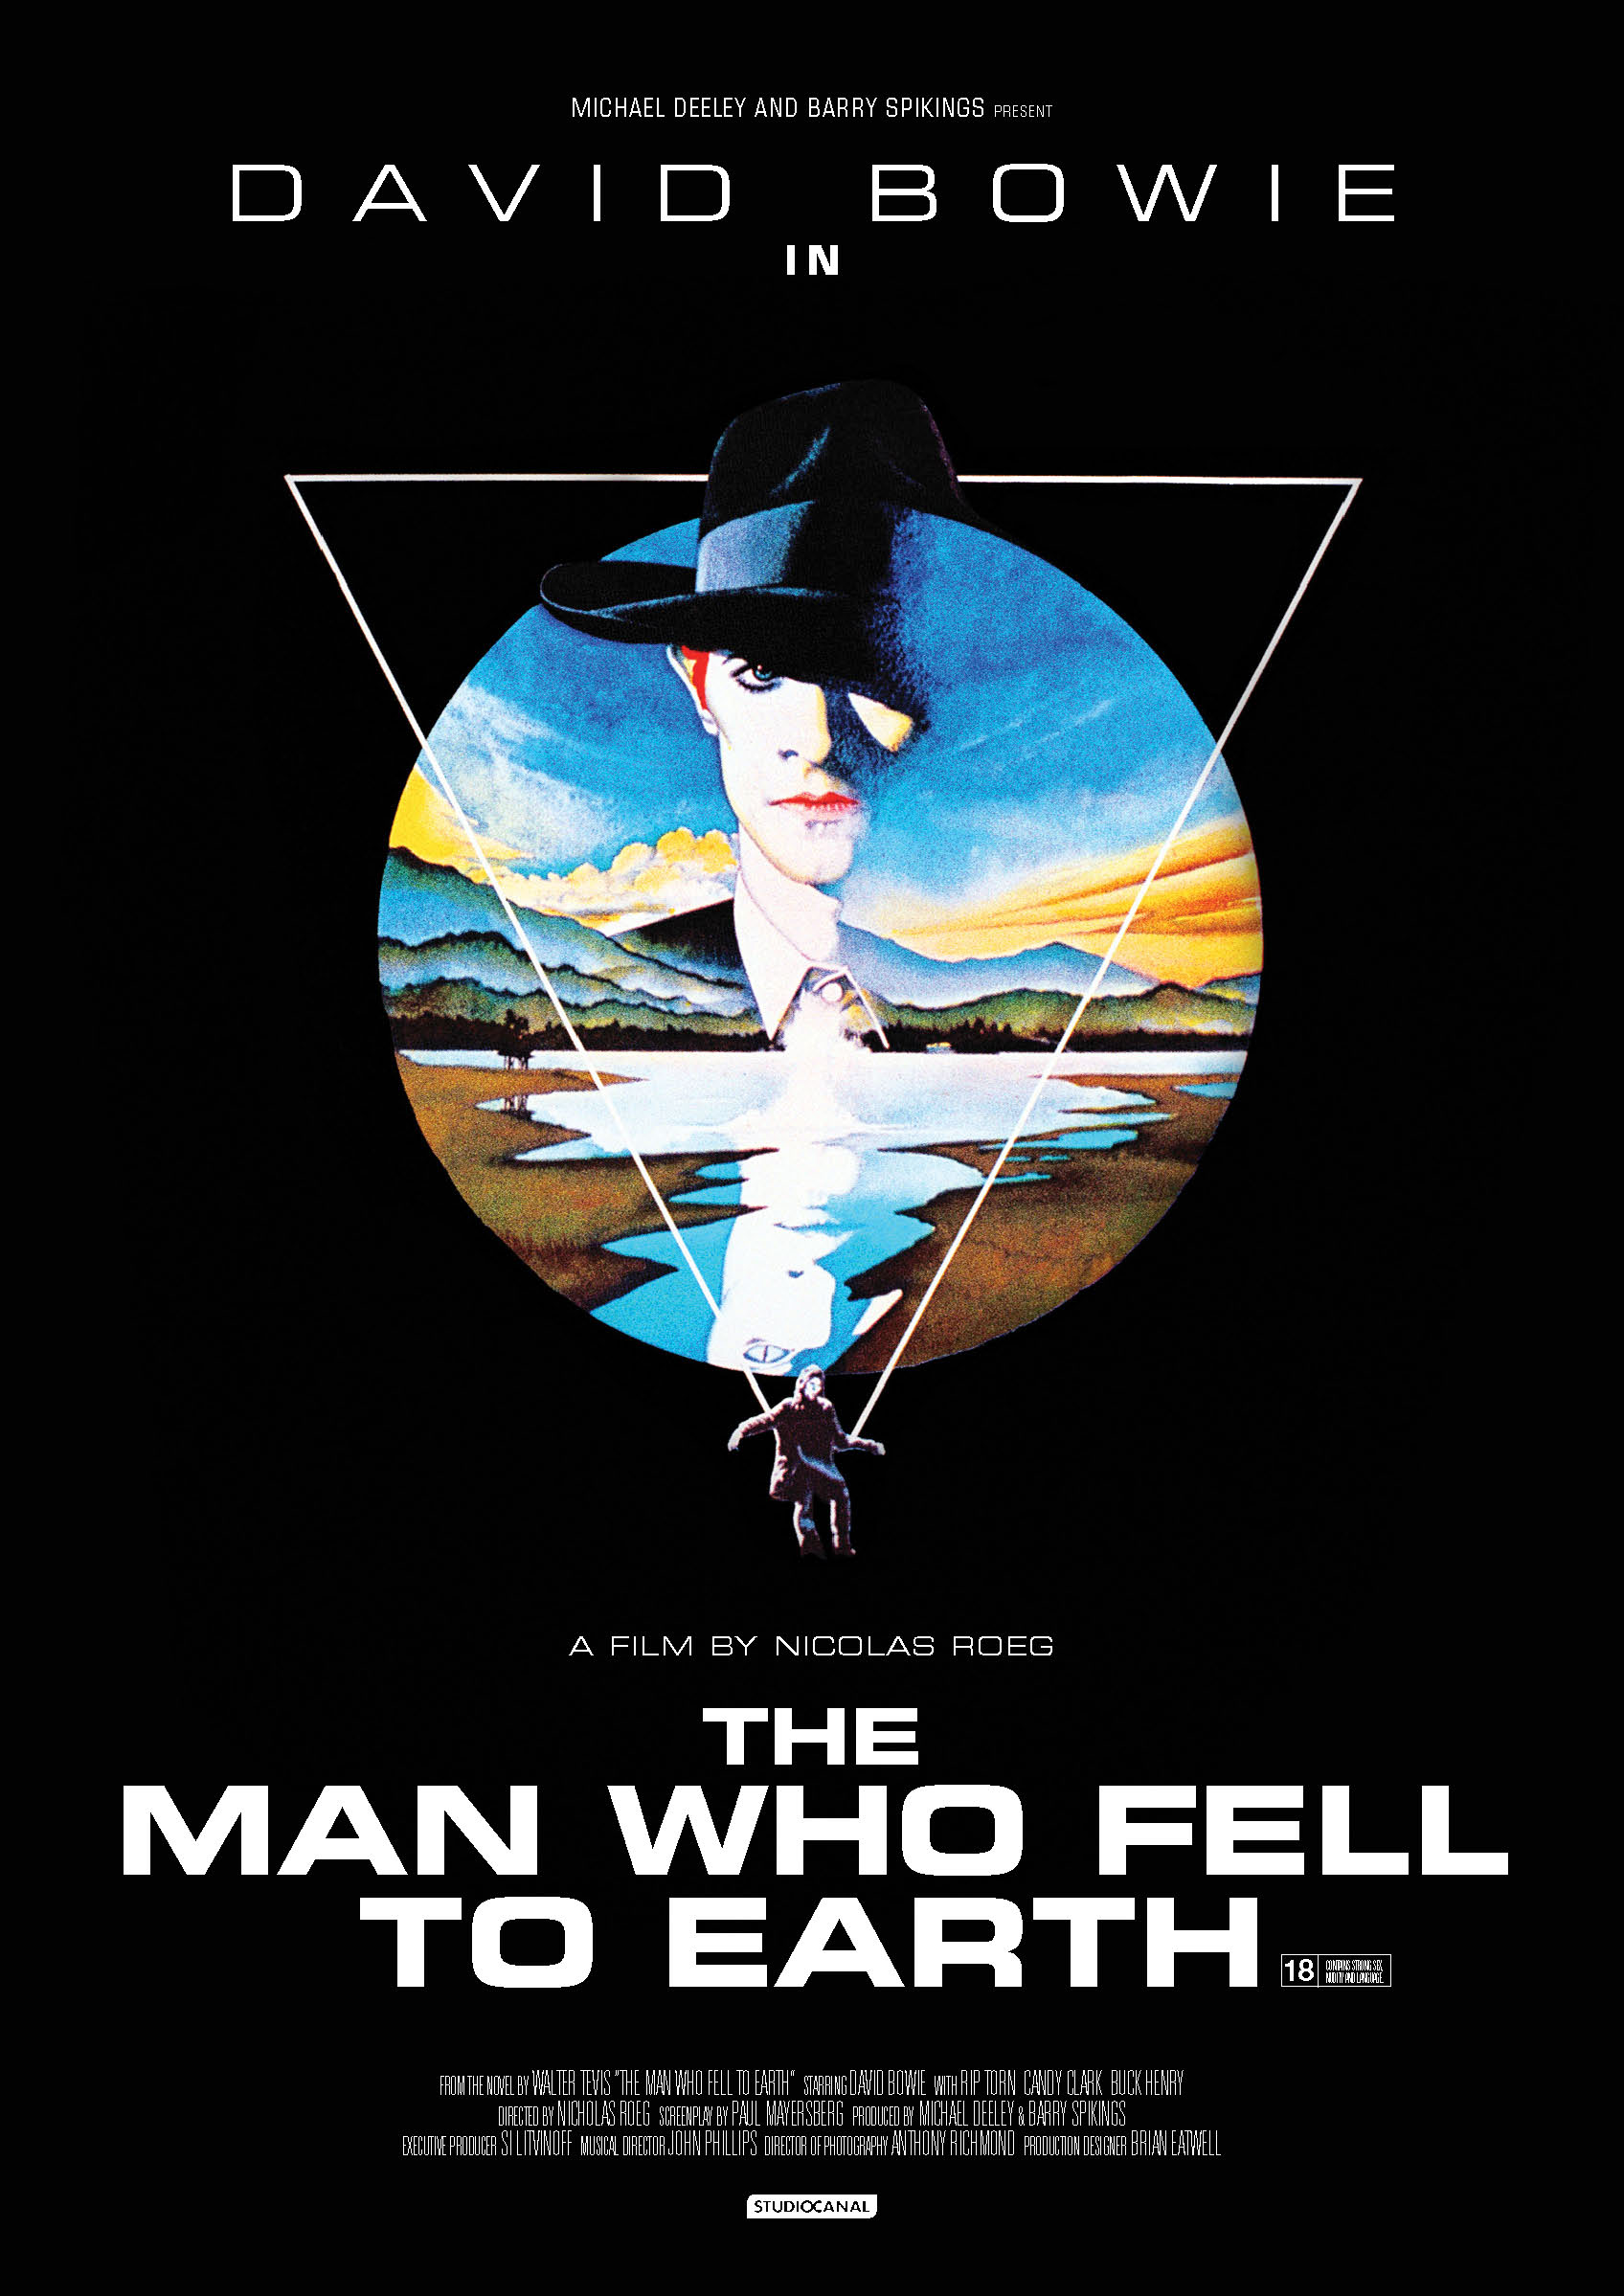 Aero Theatre Presents: The Man Who Fell to Earth